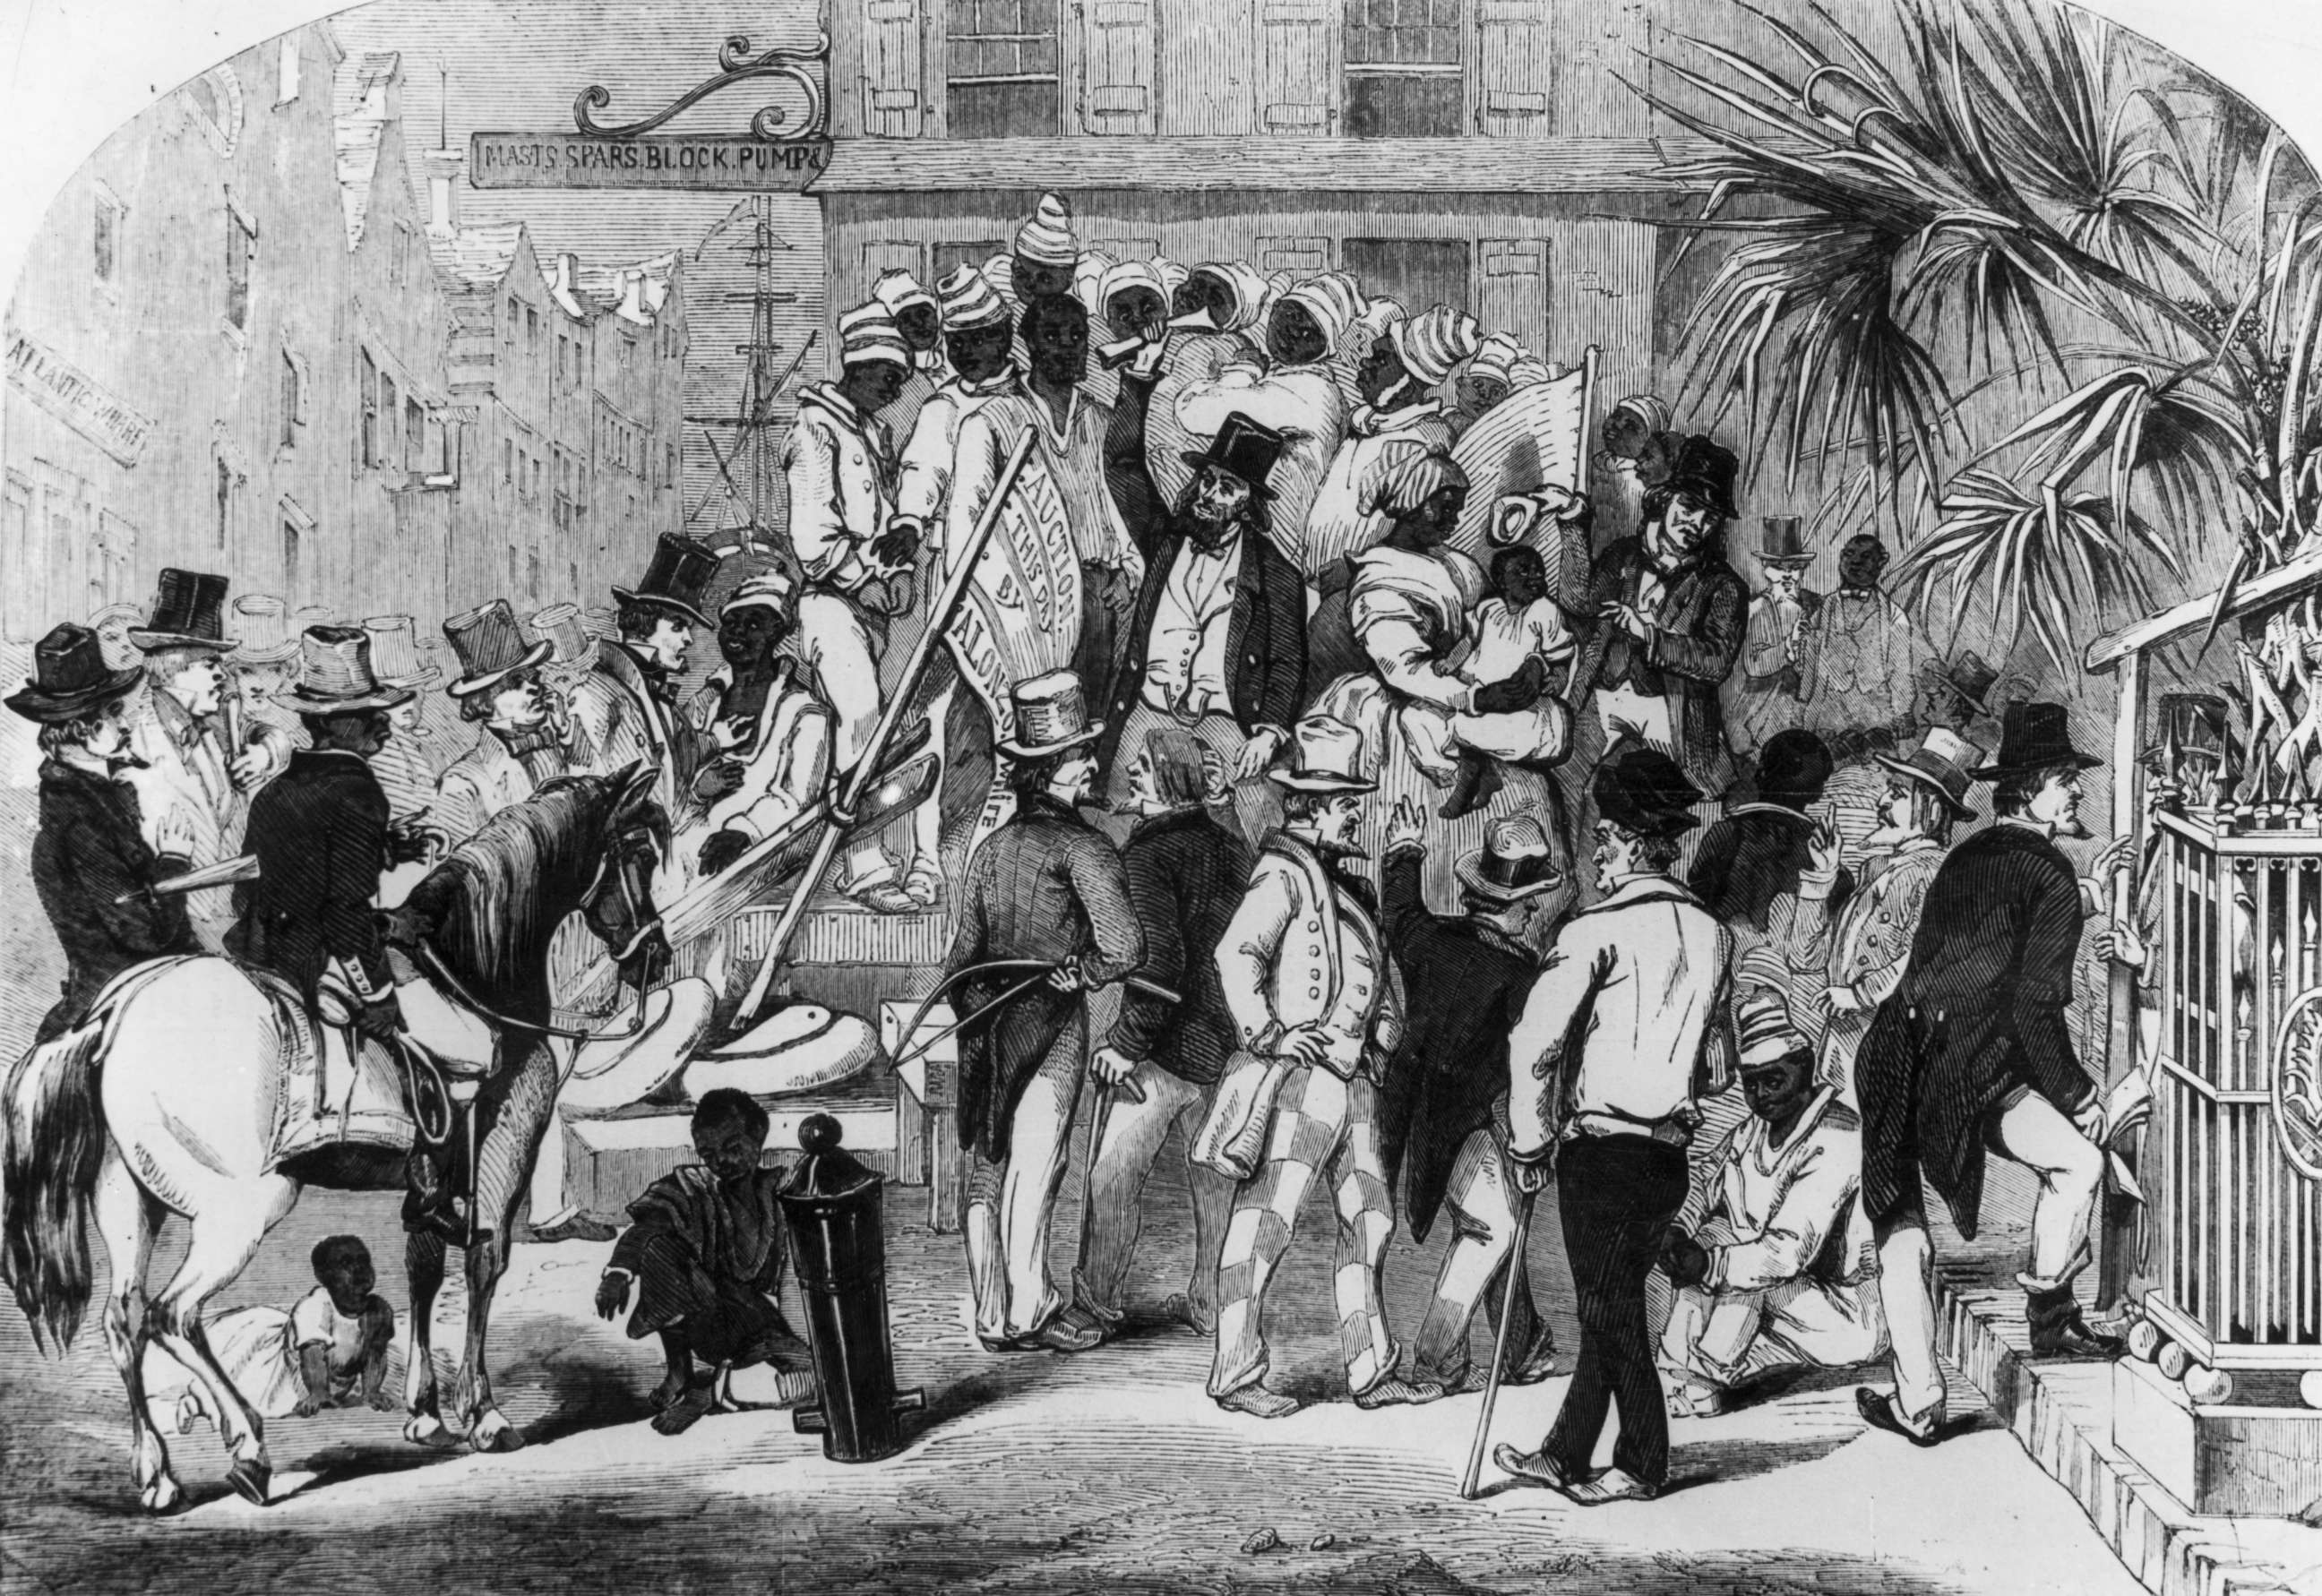 PHOTO: An engraving shows slaves being sold at auction in Charleston, S.C., circa 1860.